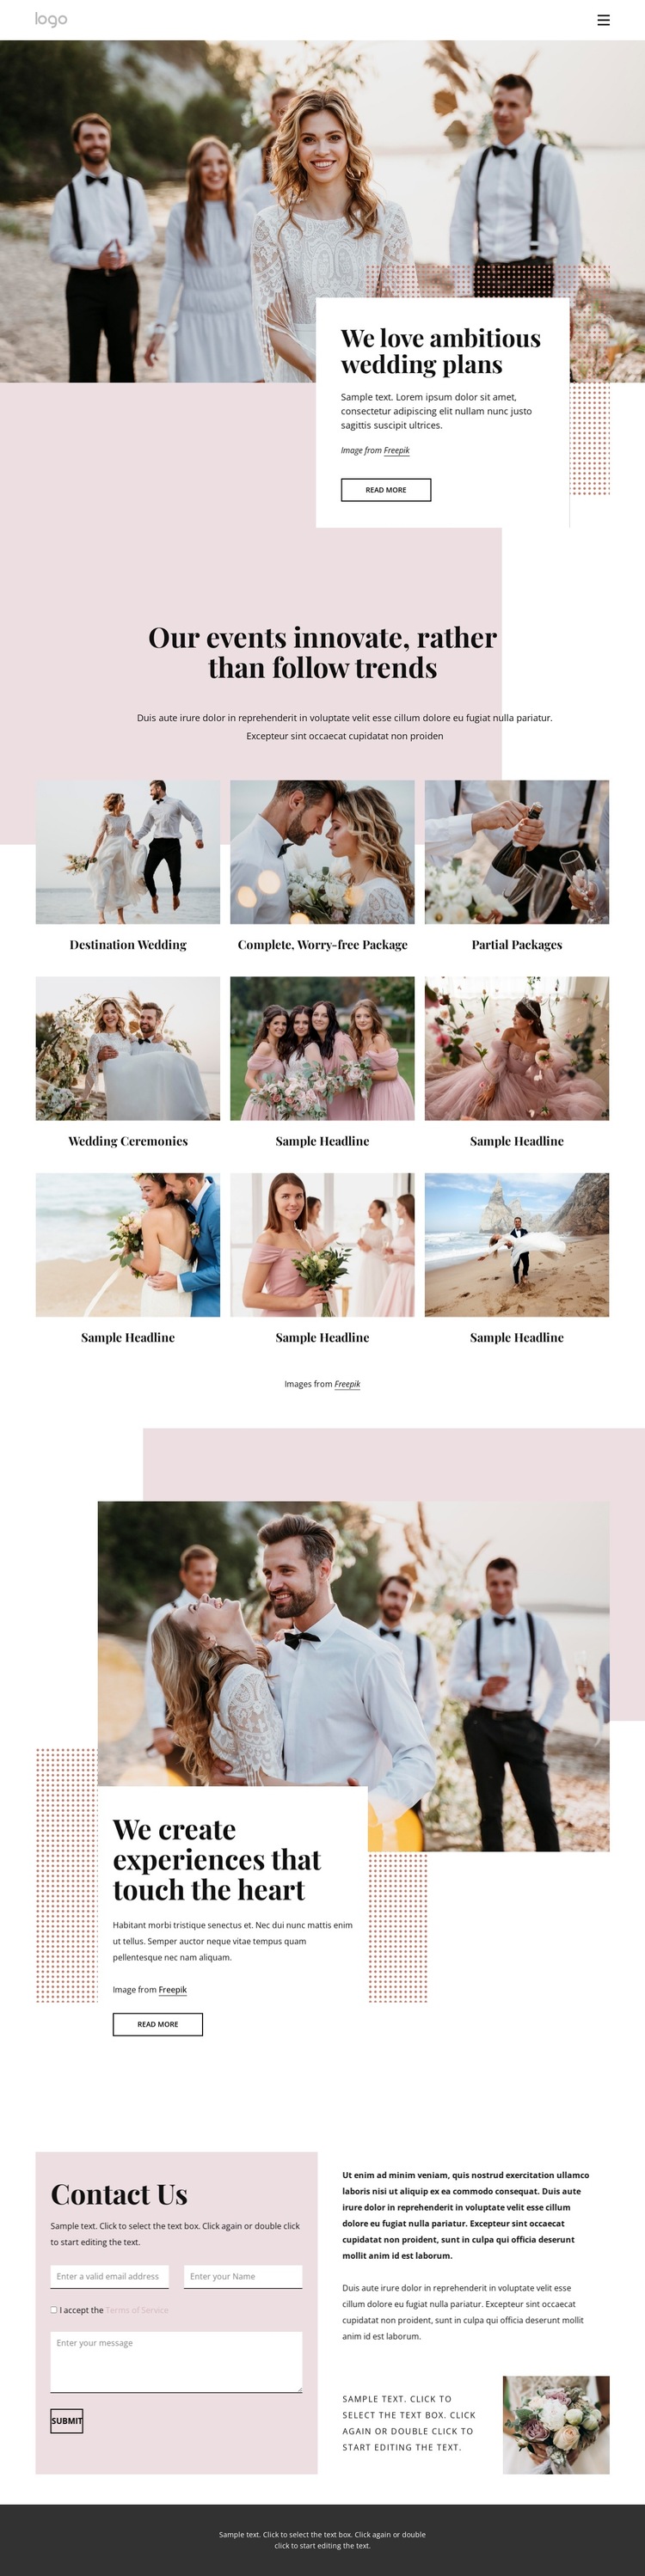 We love ambitious wedding plans HTML5 Template